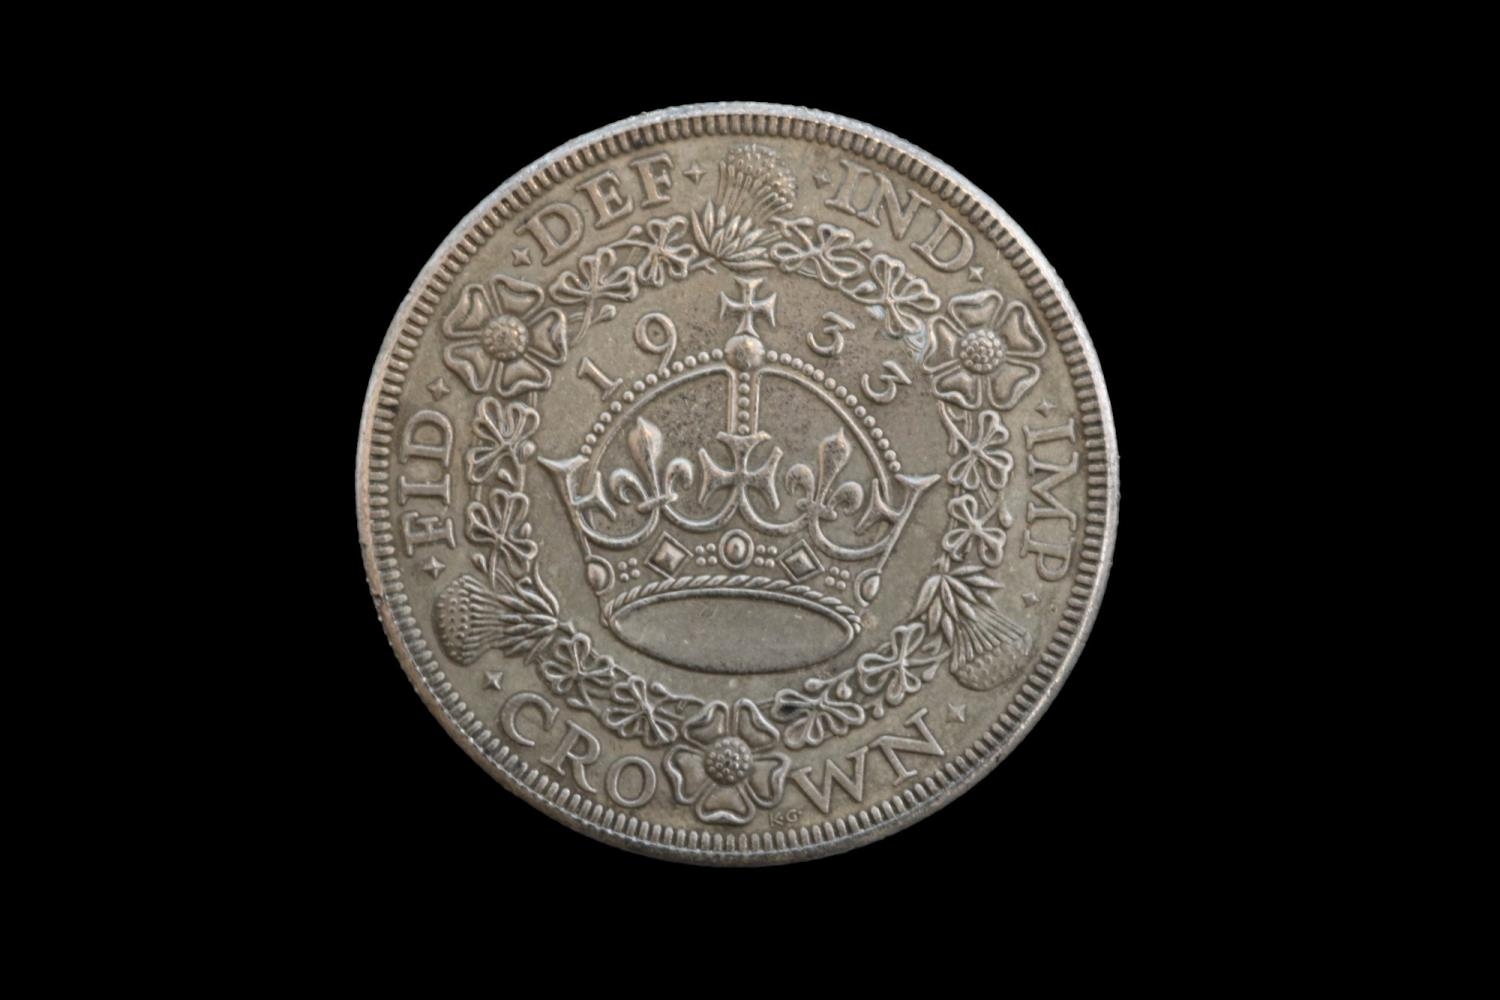 Great Britain Silver King George V Wreath Crown 1933, silver wreath crown 7,132 issued 38mm in